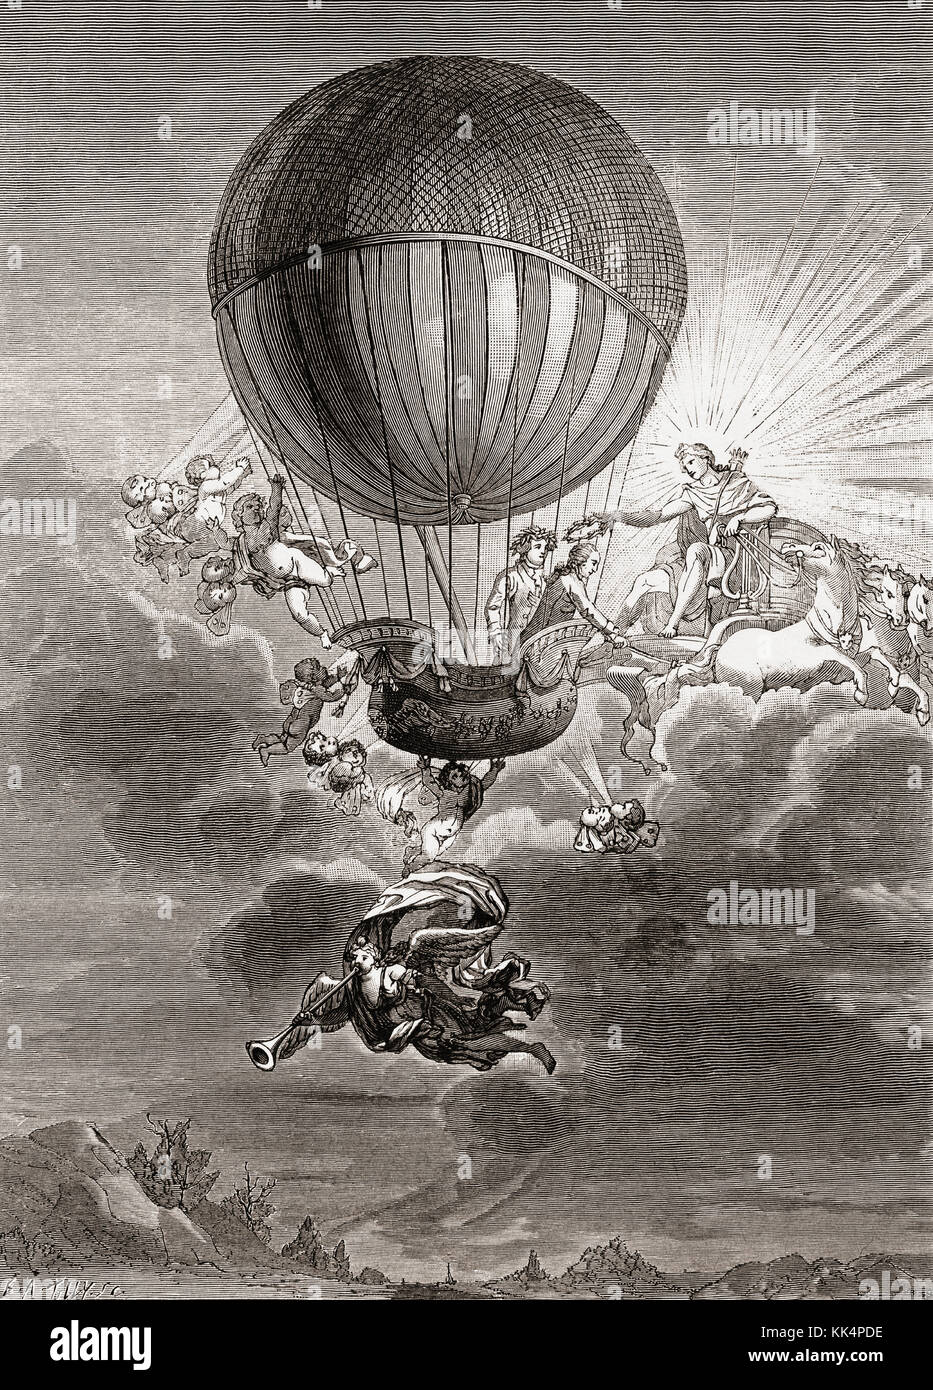 Allegorical work showing balloonist Jacques Alexandre César Charles receiving a wreath from Apollo.  Jacques Alexandre César Charles, 1746 - 1823. French balloonist, inventor, scientist and mathematician. Stock Photo